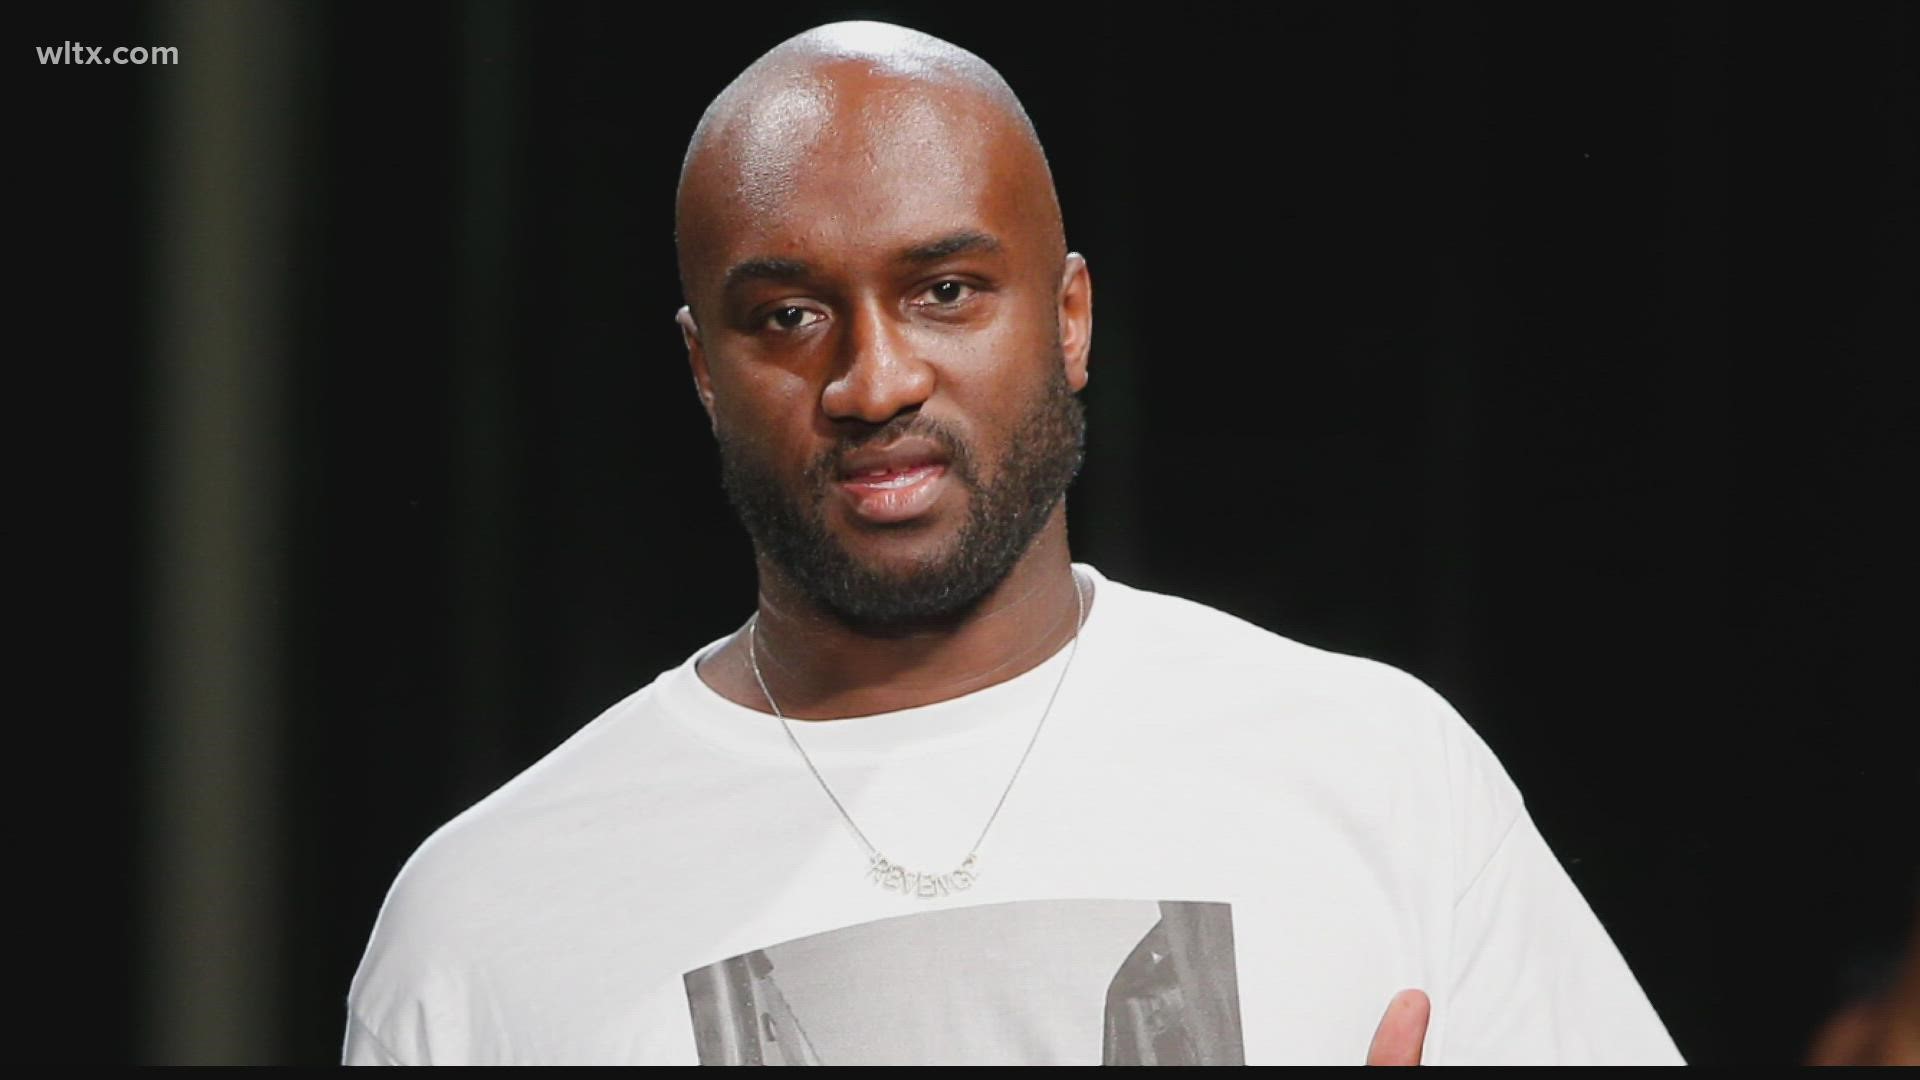 A statement from Abloh’s family on the designer’s Instagram account said for the last two years, Abloh battled cardiac angiosarcoma, a rare form of cancer.